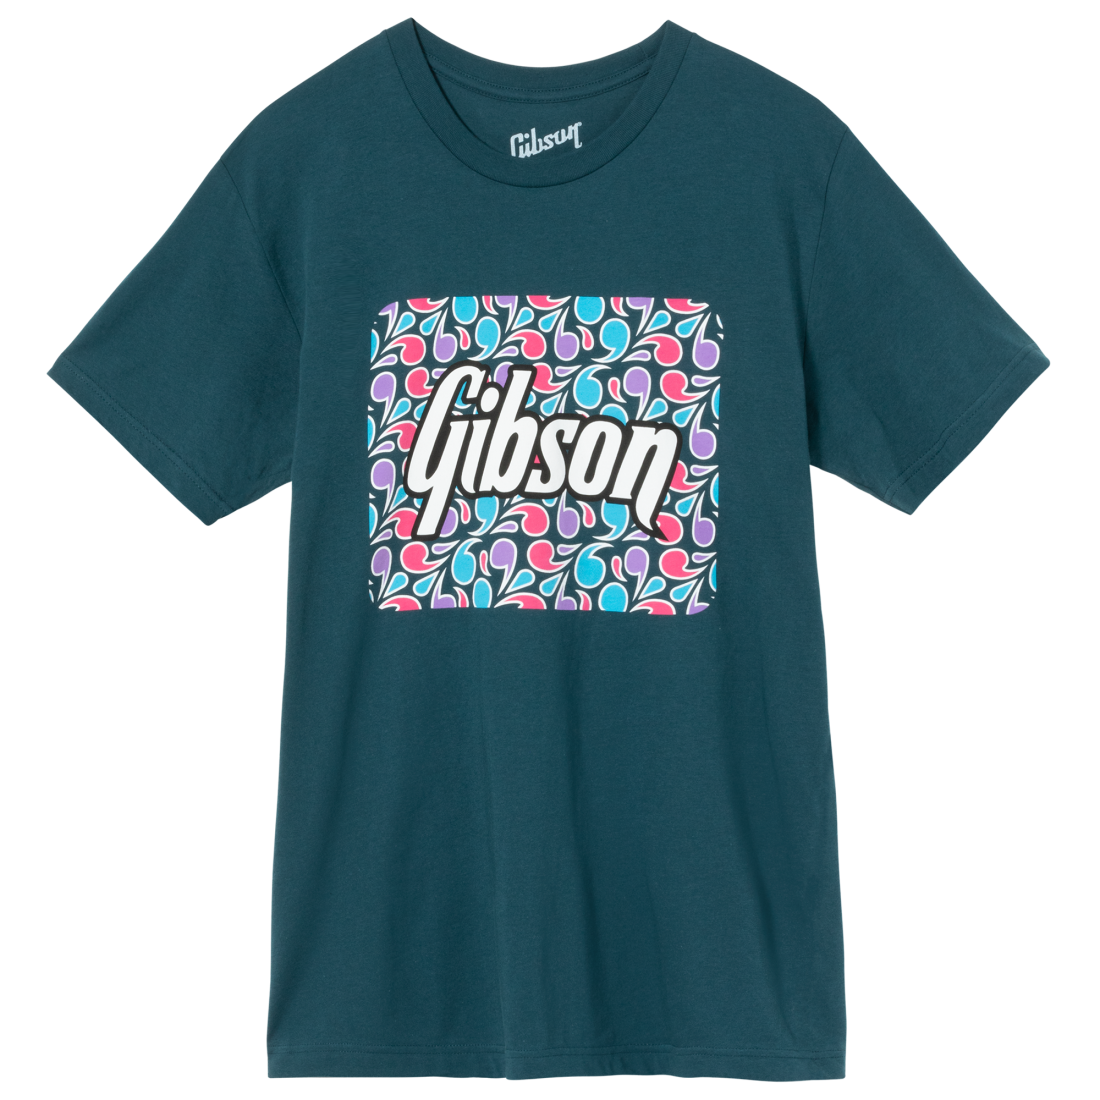 Floral Block Logo Teal Tee - Small